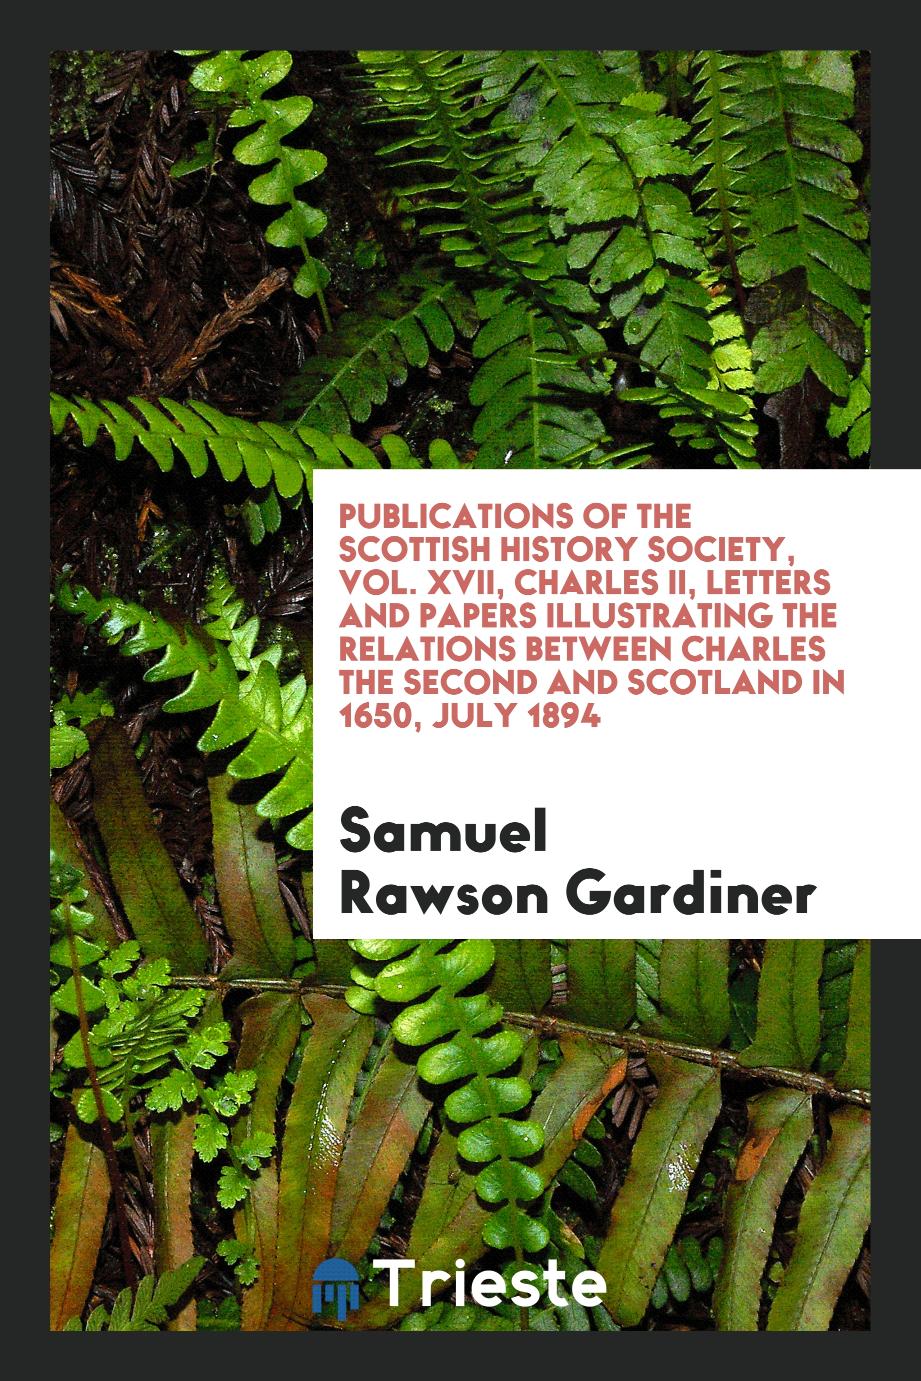 Publications of the Scottish History Society, Vol. XVII, Charles II, Letters and papers illustrating the relations between Charles the Second and Scotland in 1650, July 1894